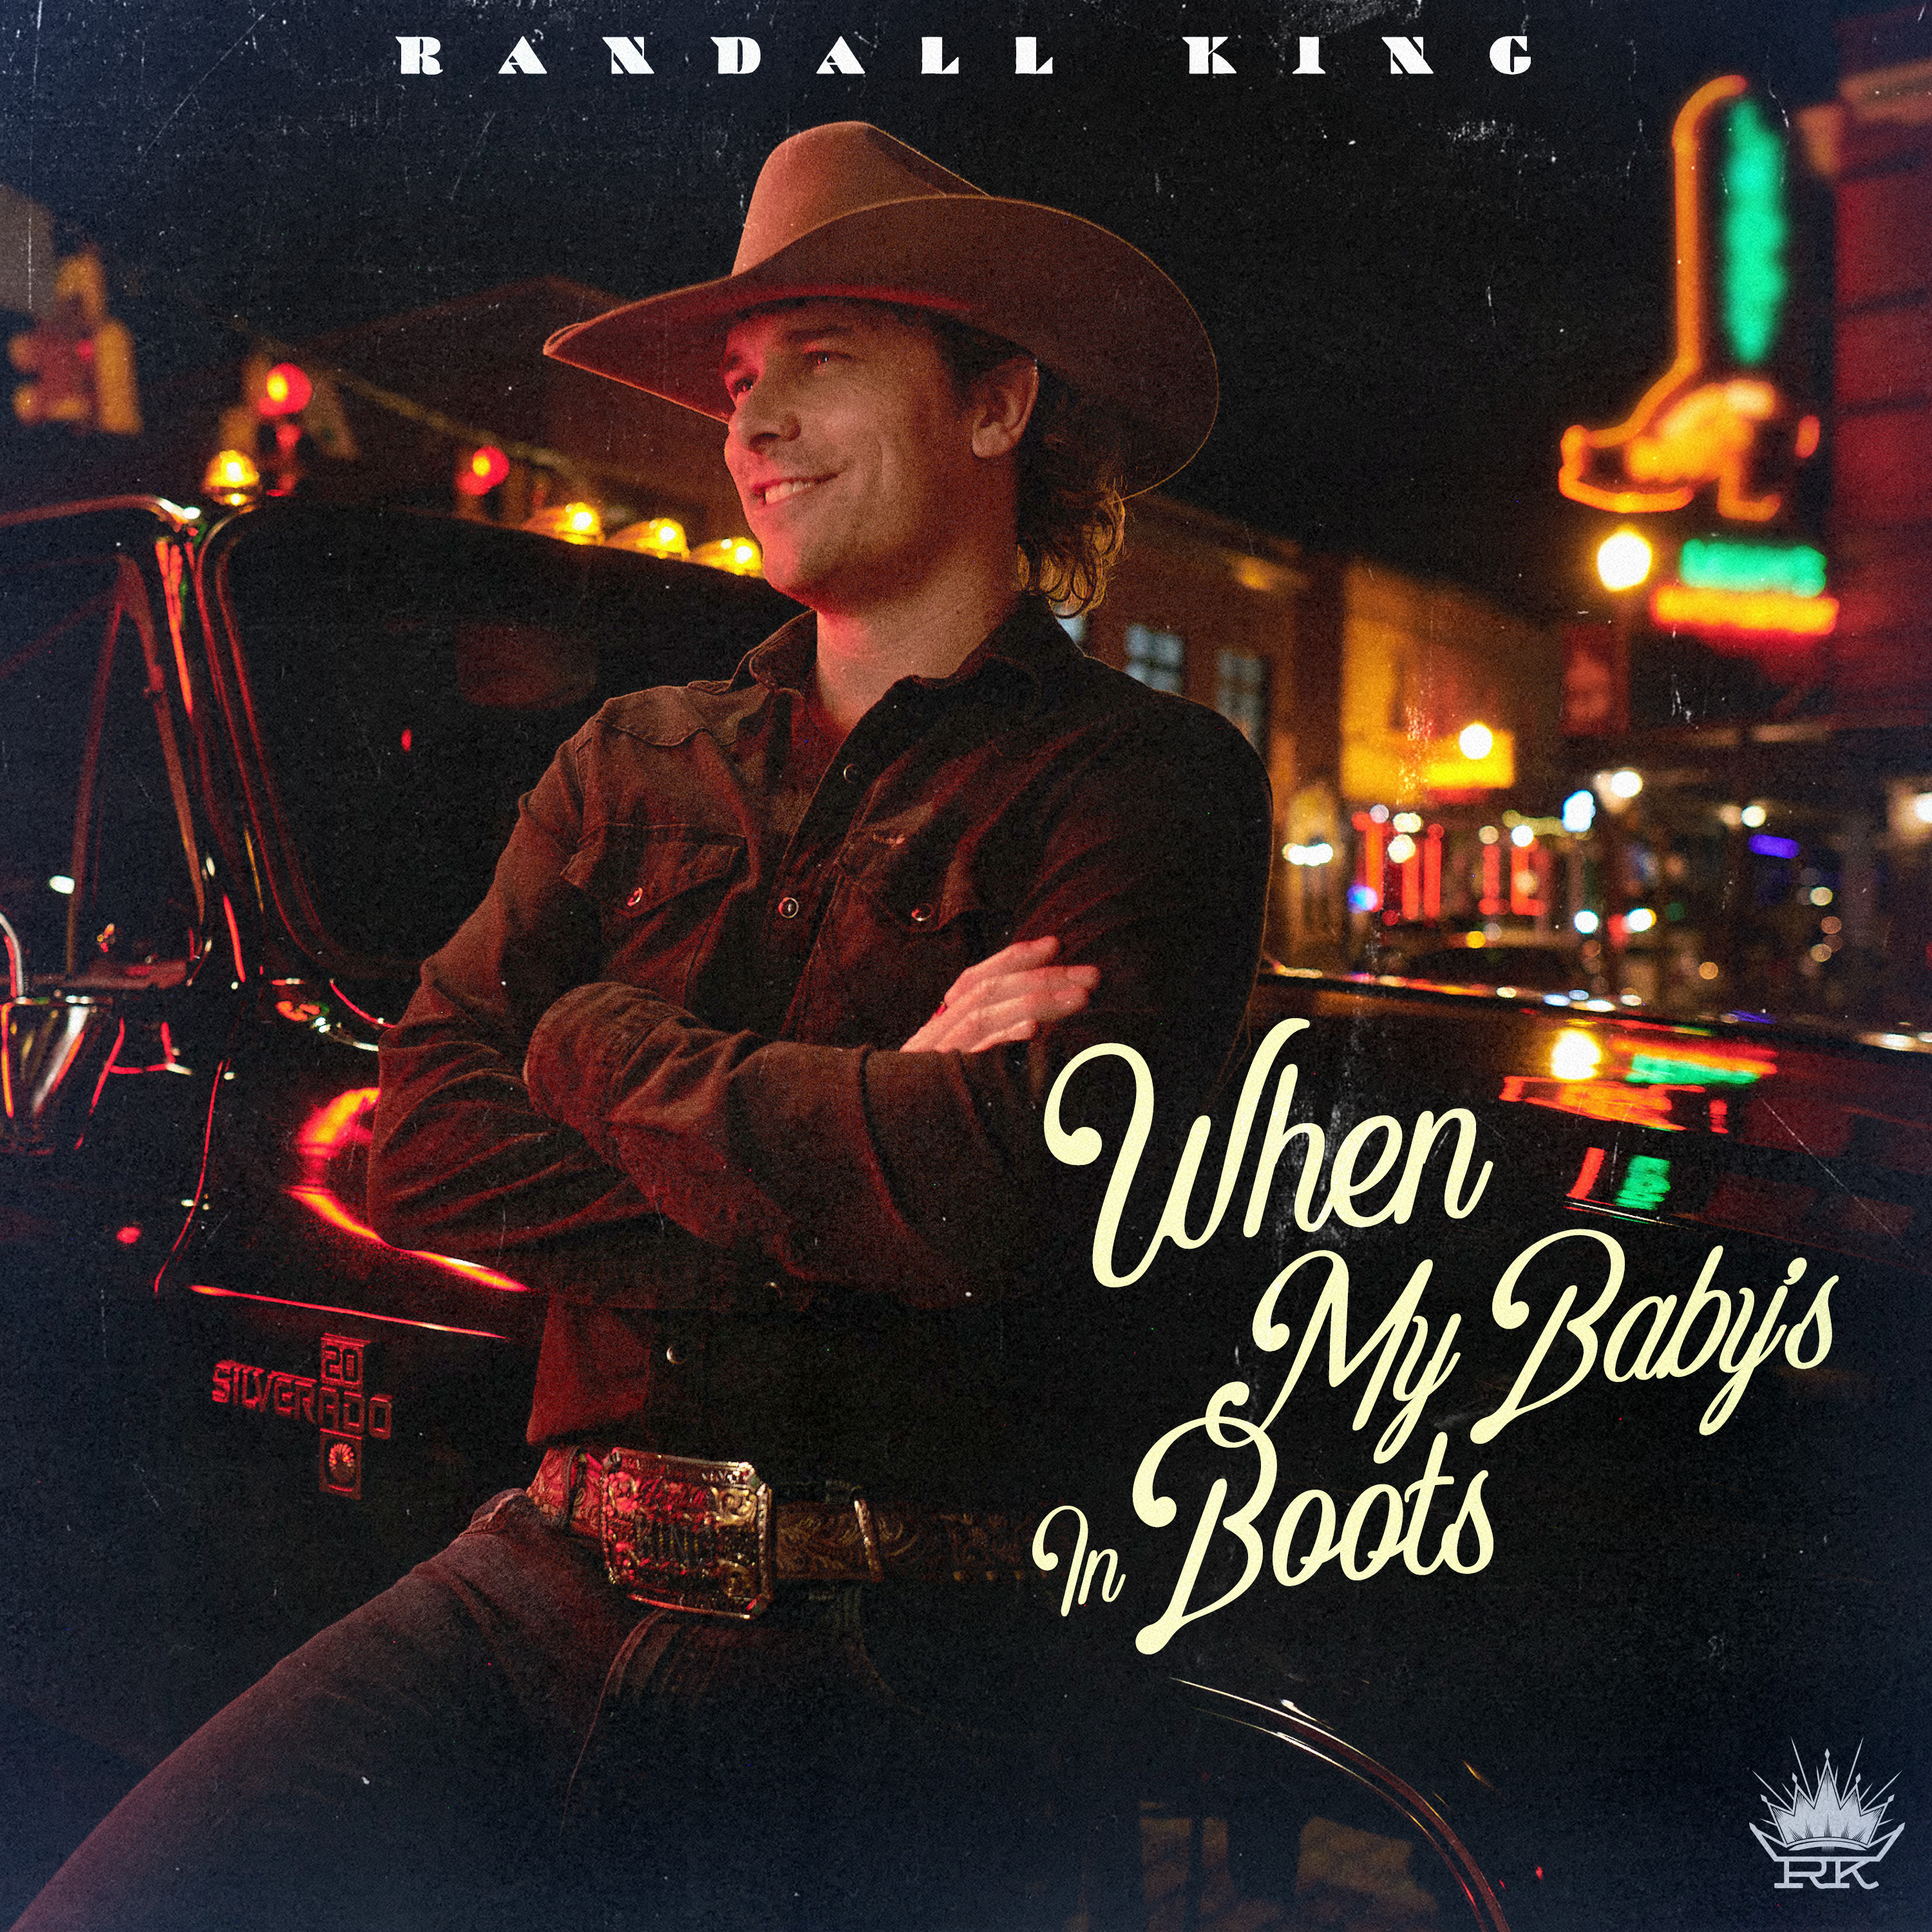 RANDALL KING RELEASES “WHEN MY BABY’S IN BOOTS”